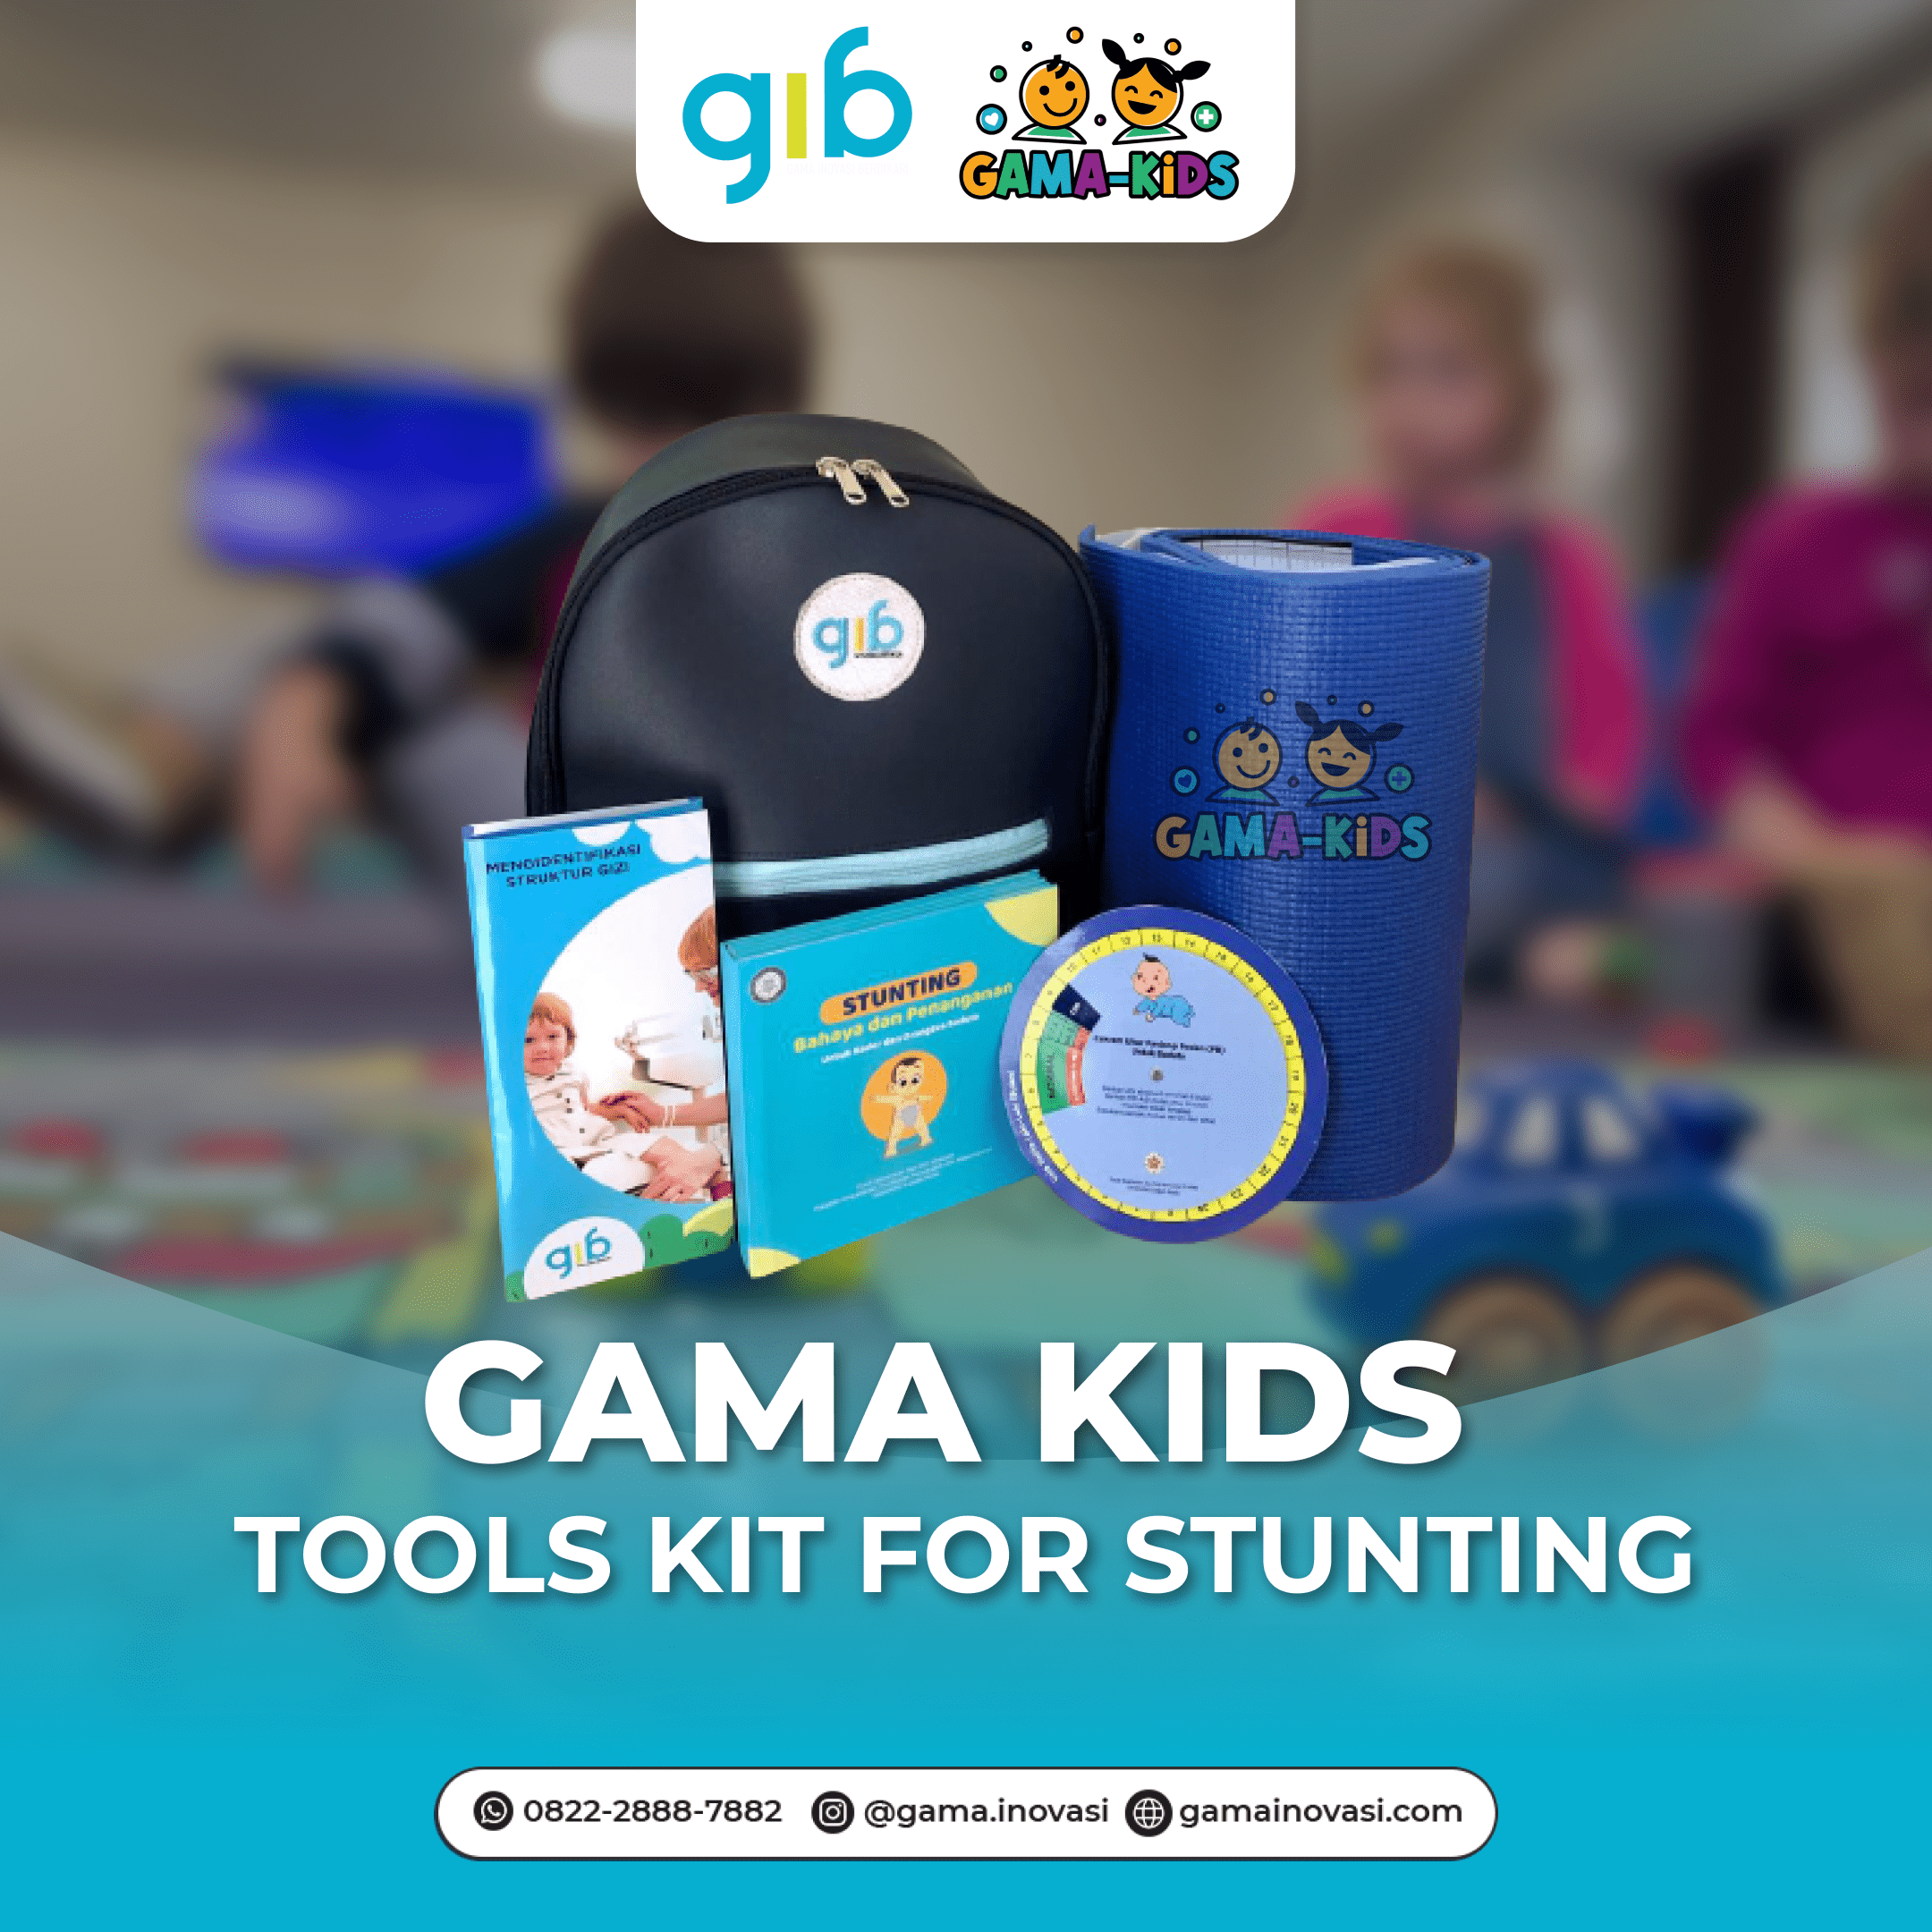 GAMA-KiDS: Tools for Stunting 